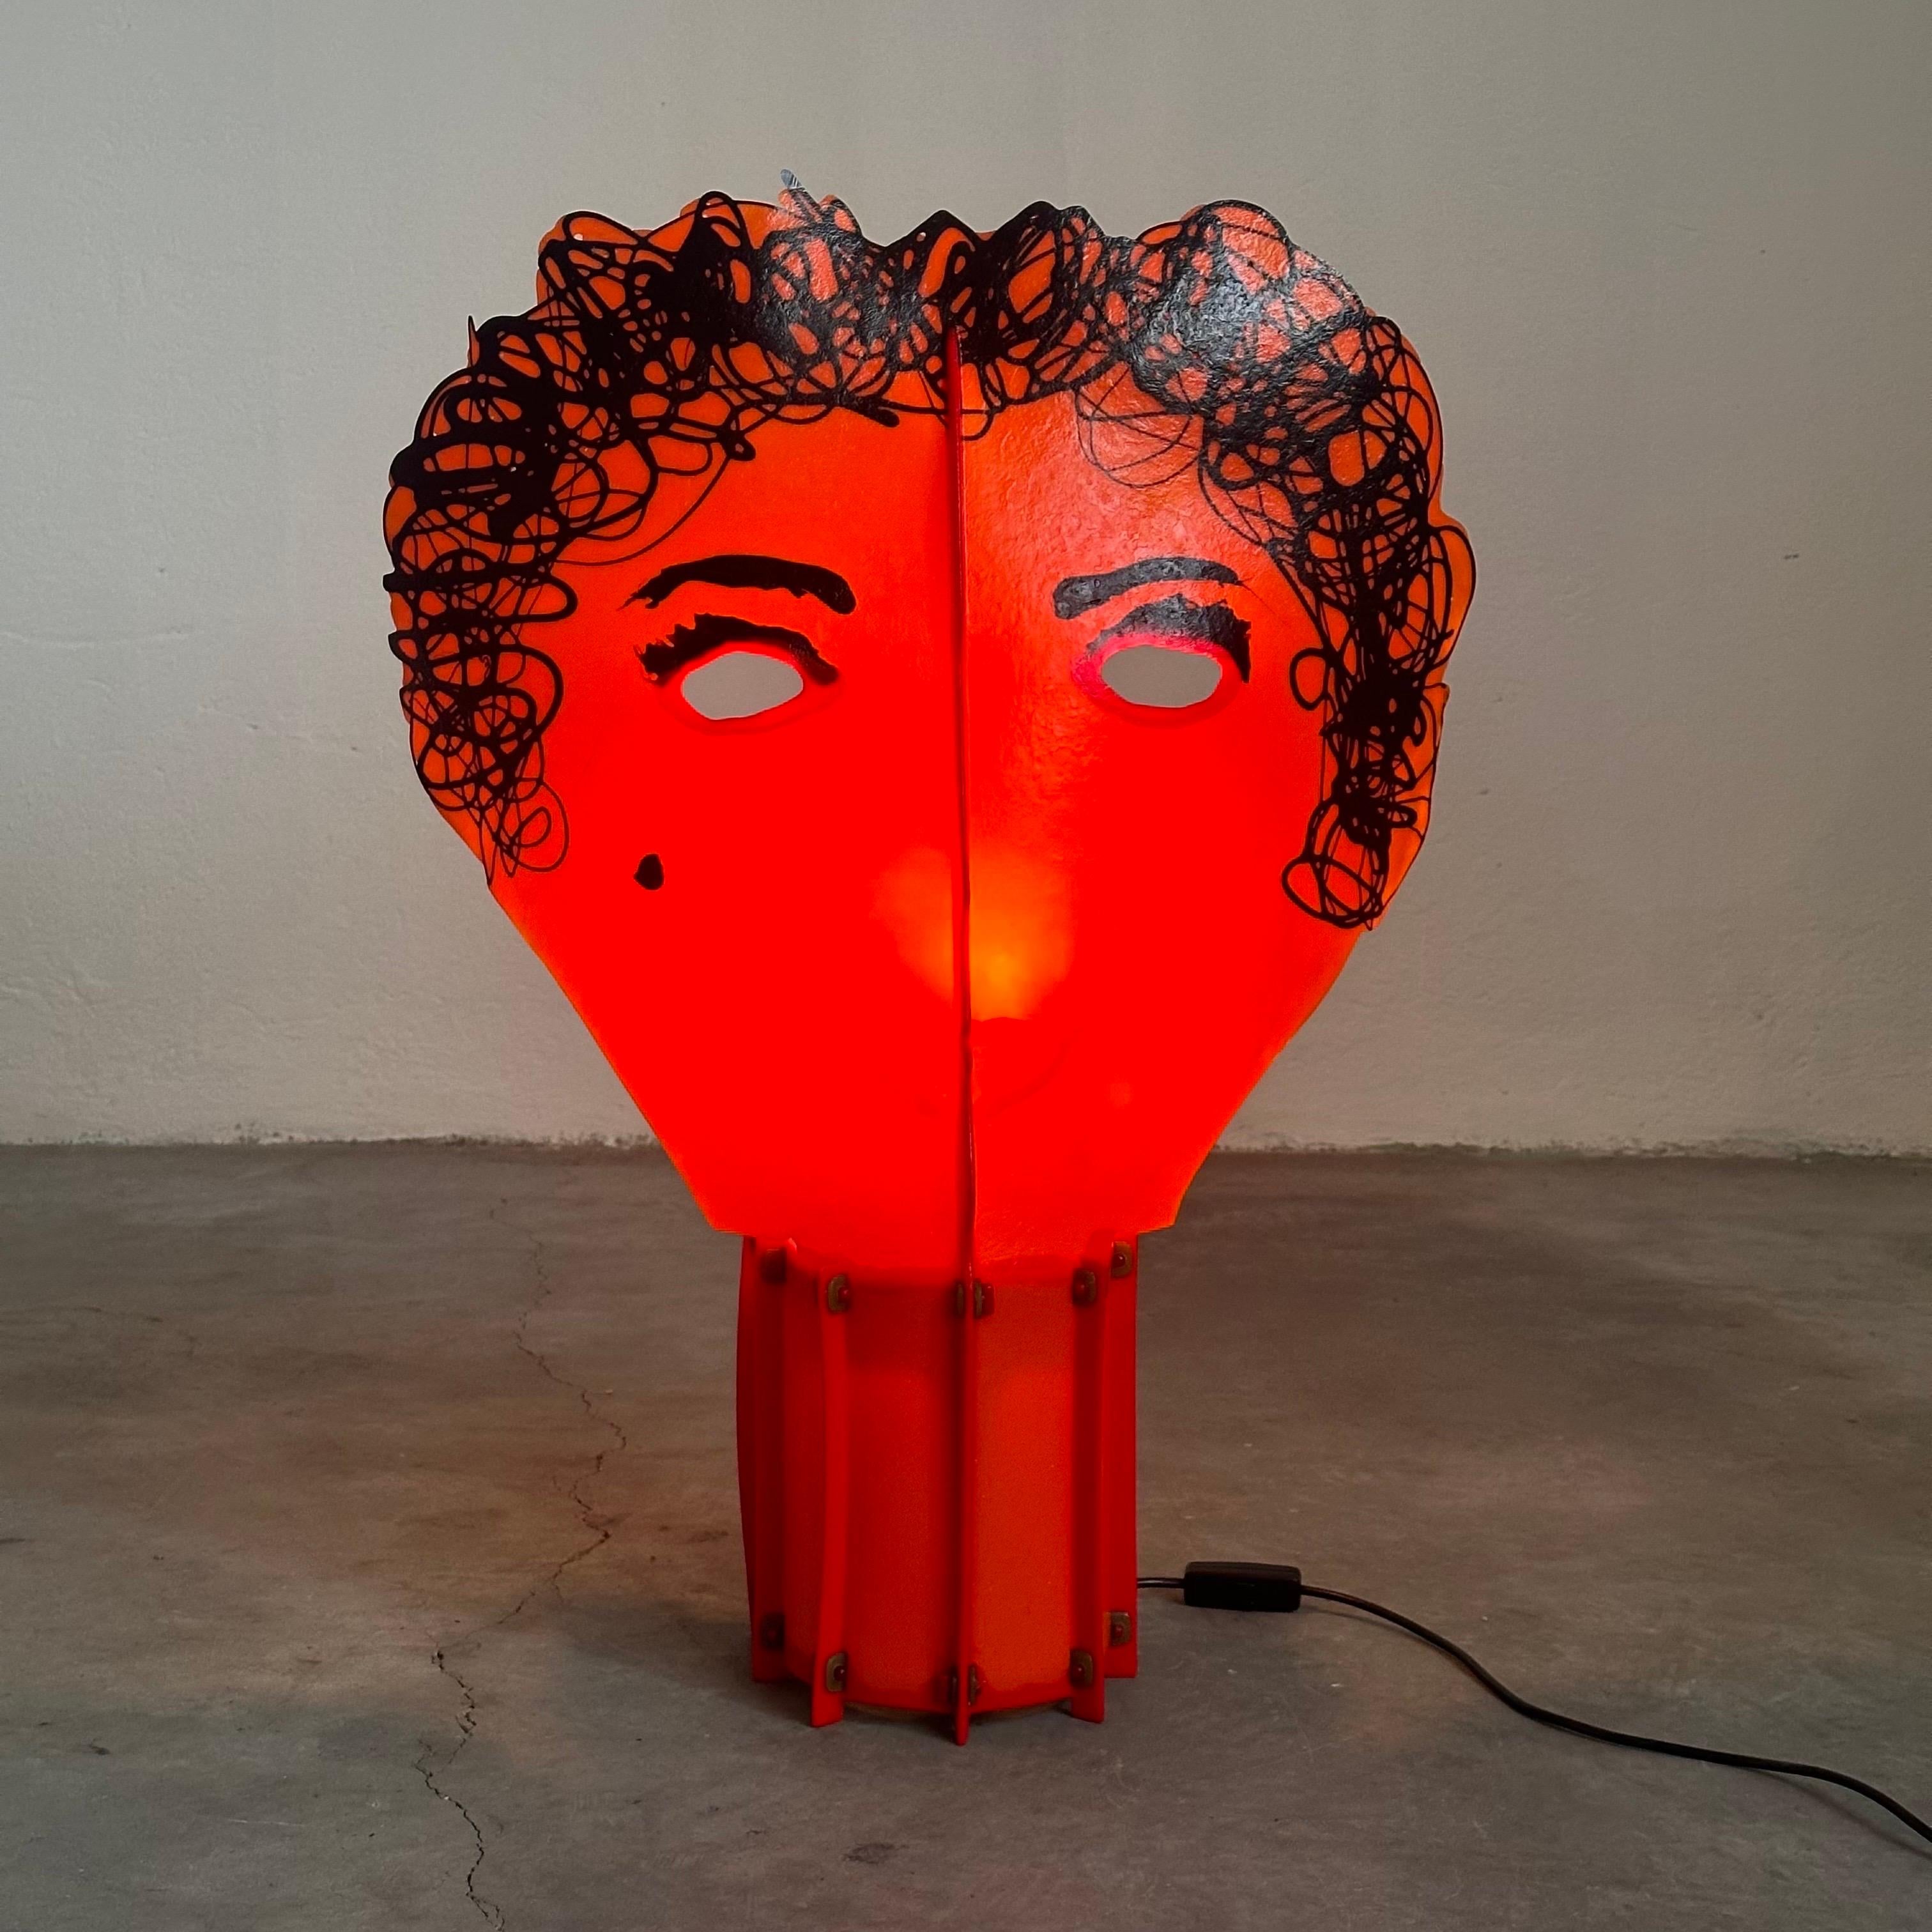 Rare Gaetano Pesce 'Some of Us' Floor/Table Lamp for Meritalia, 2002 (Unique Artistic Statement Piece)

Illuminate your space with an artistic statement piece unlike any other – the rare 'Some of Us' lamp designed by the iconic Gaetano Pesce for